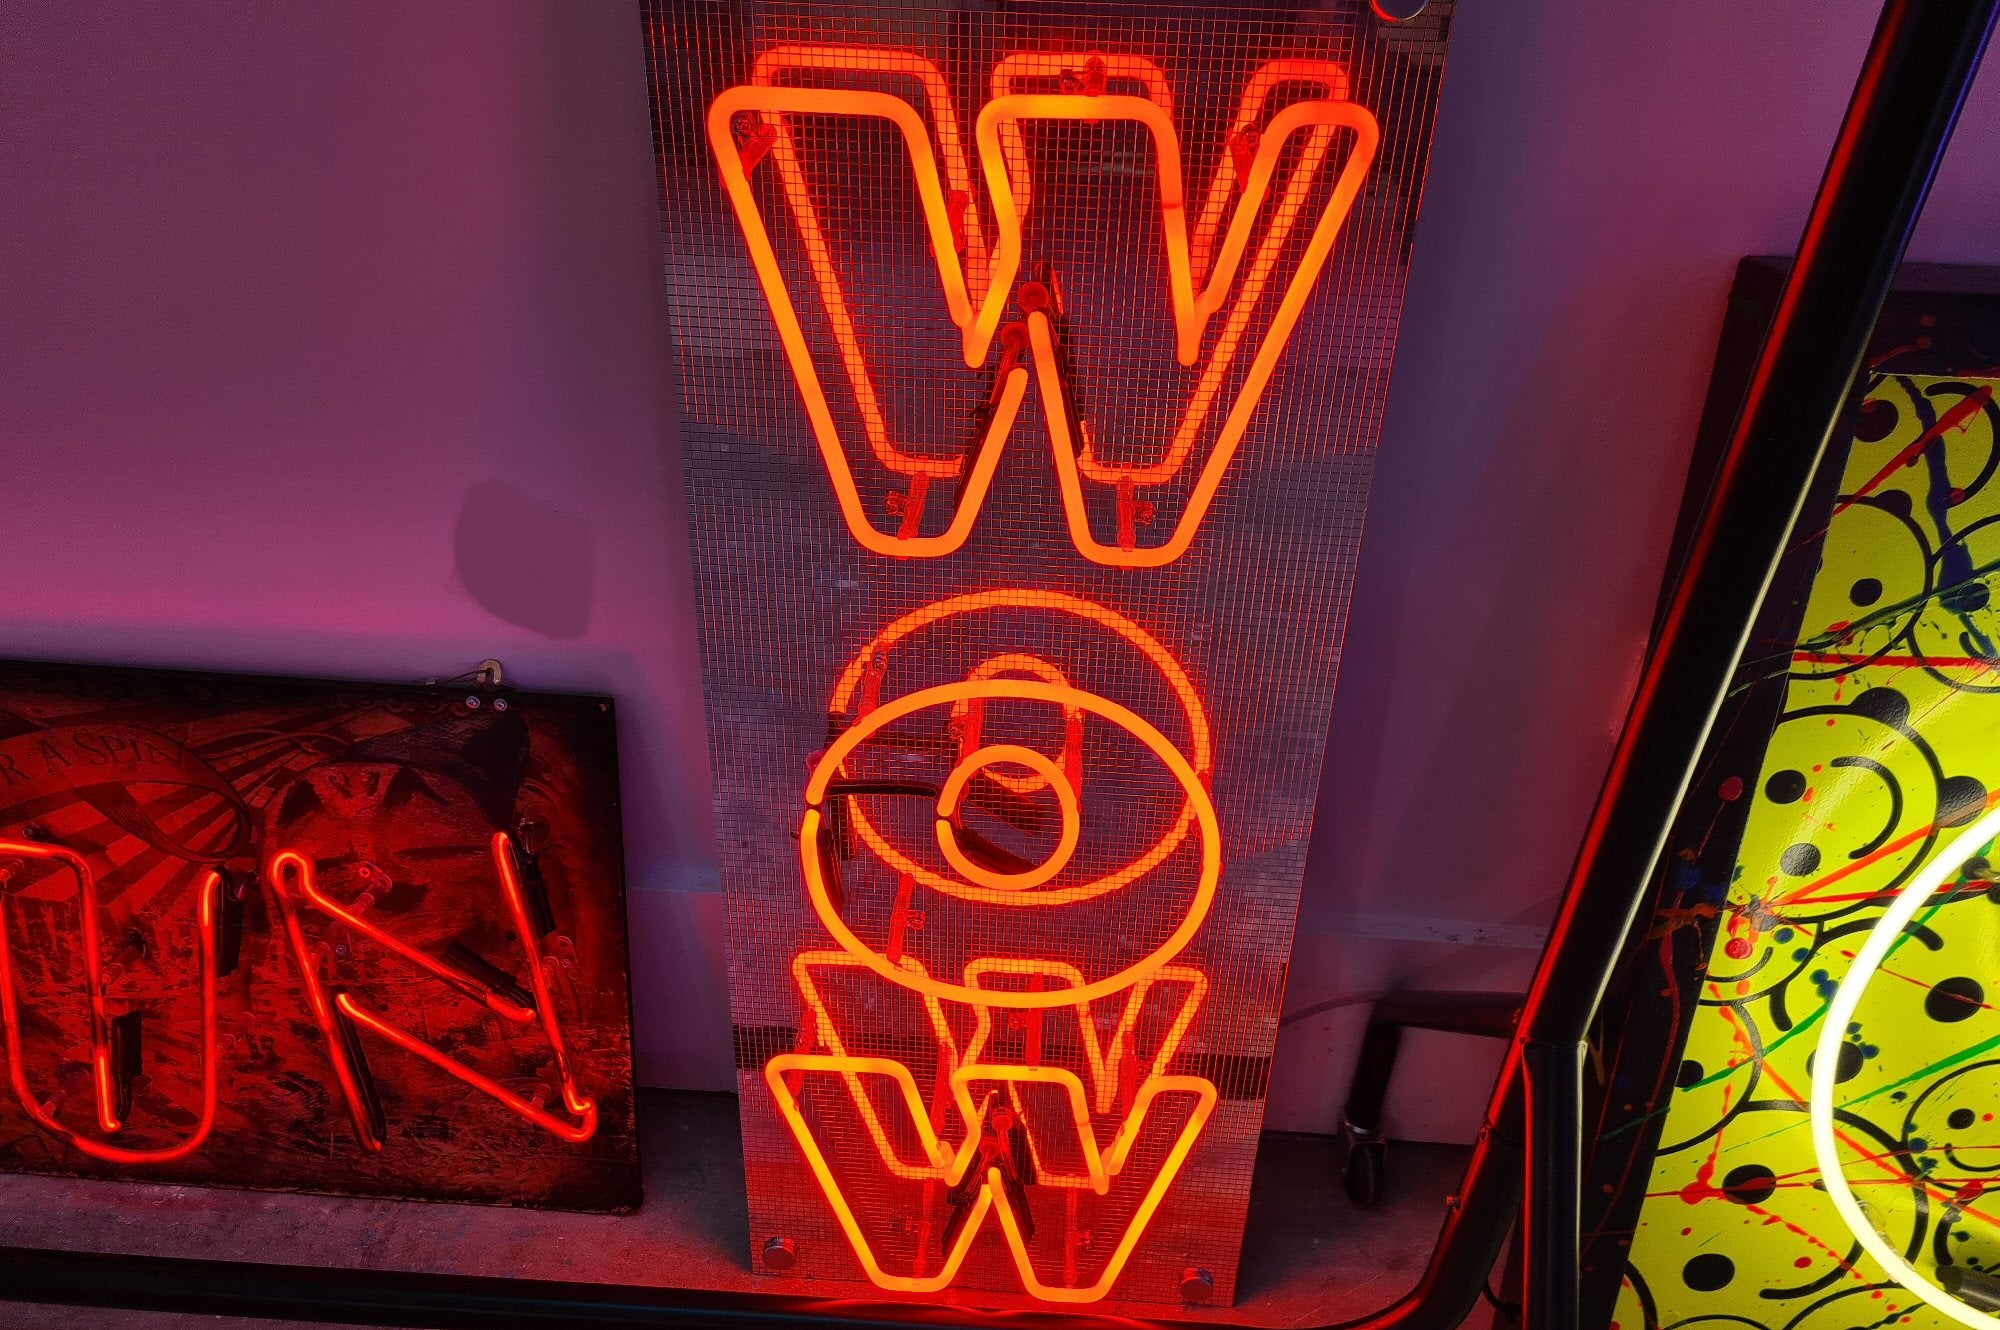 WOW Neon Sign